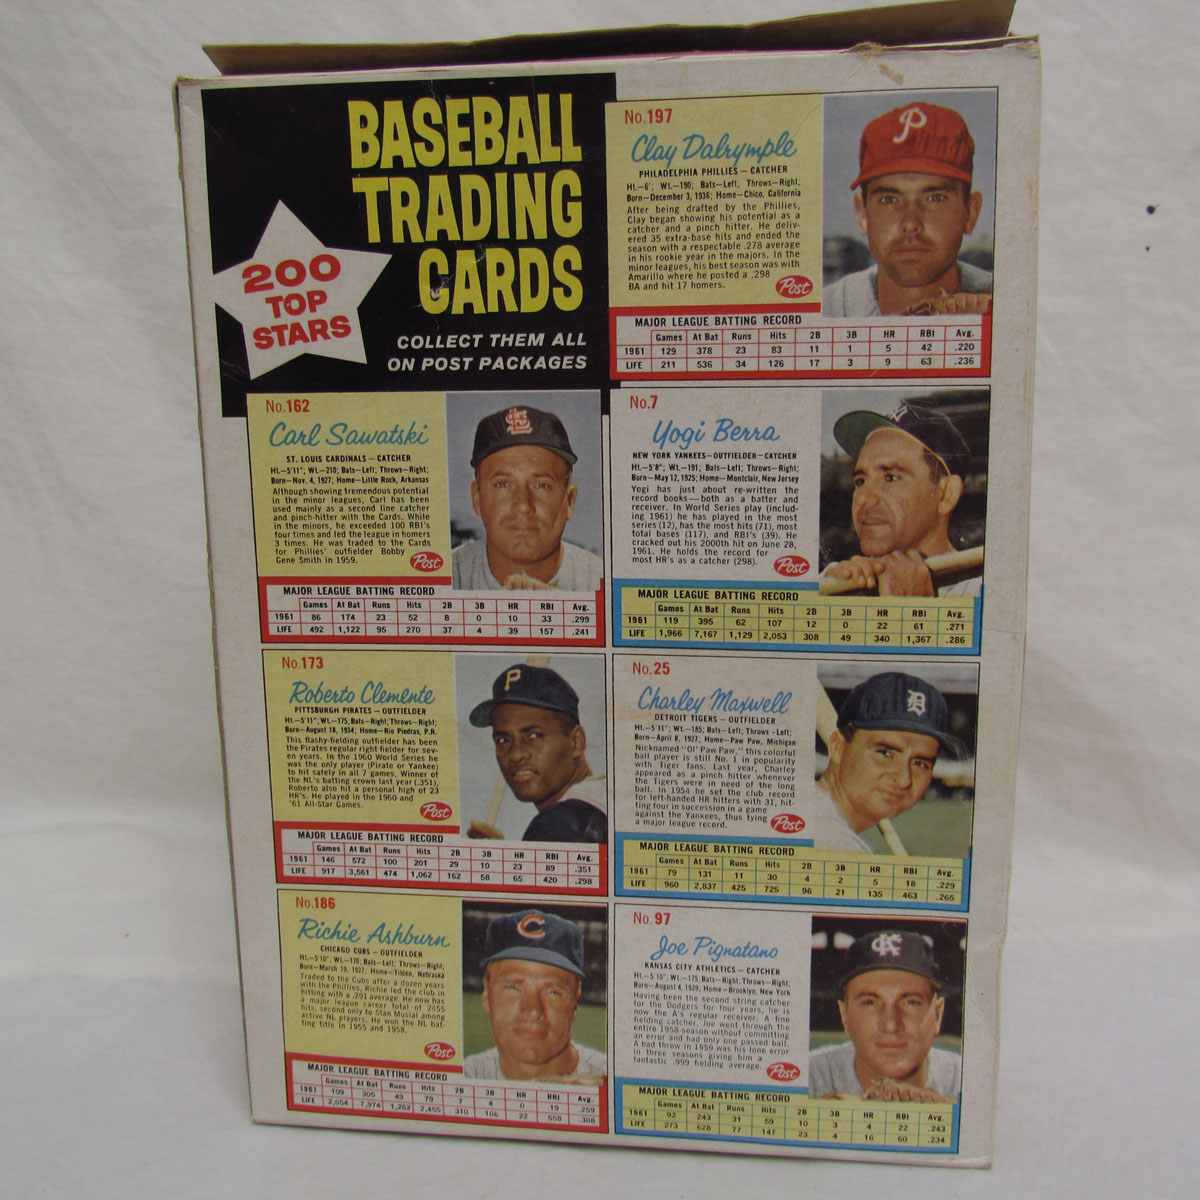 1961 Post cereal #132 cards featuring Roberto Clemente.